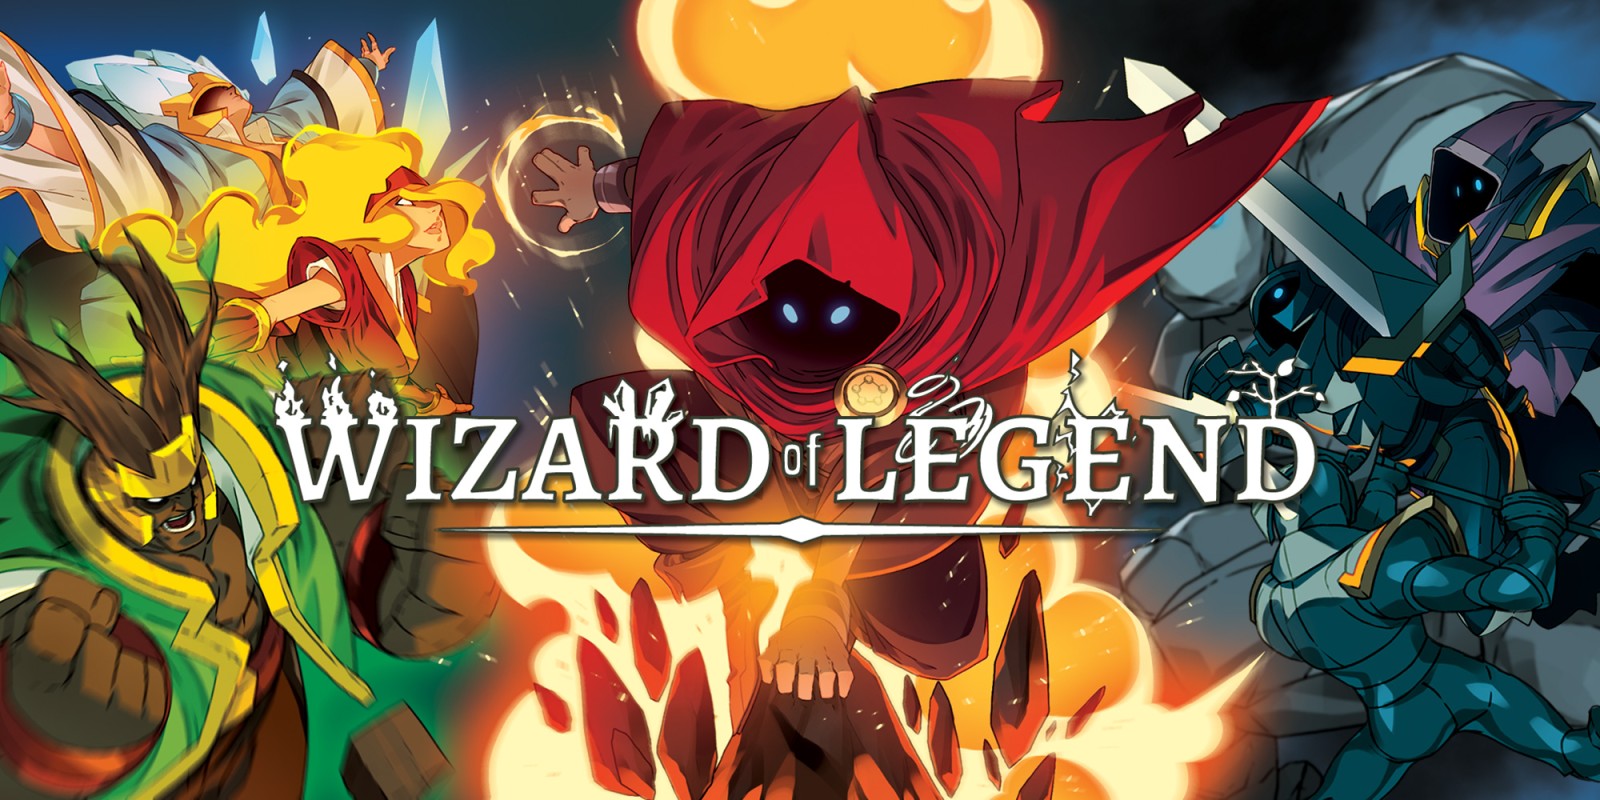 Rise of legends free download